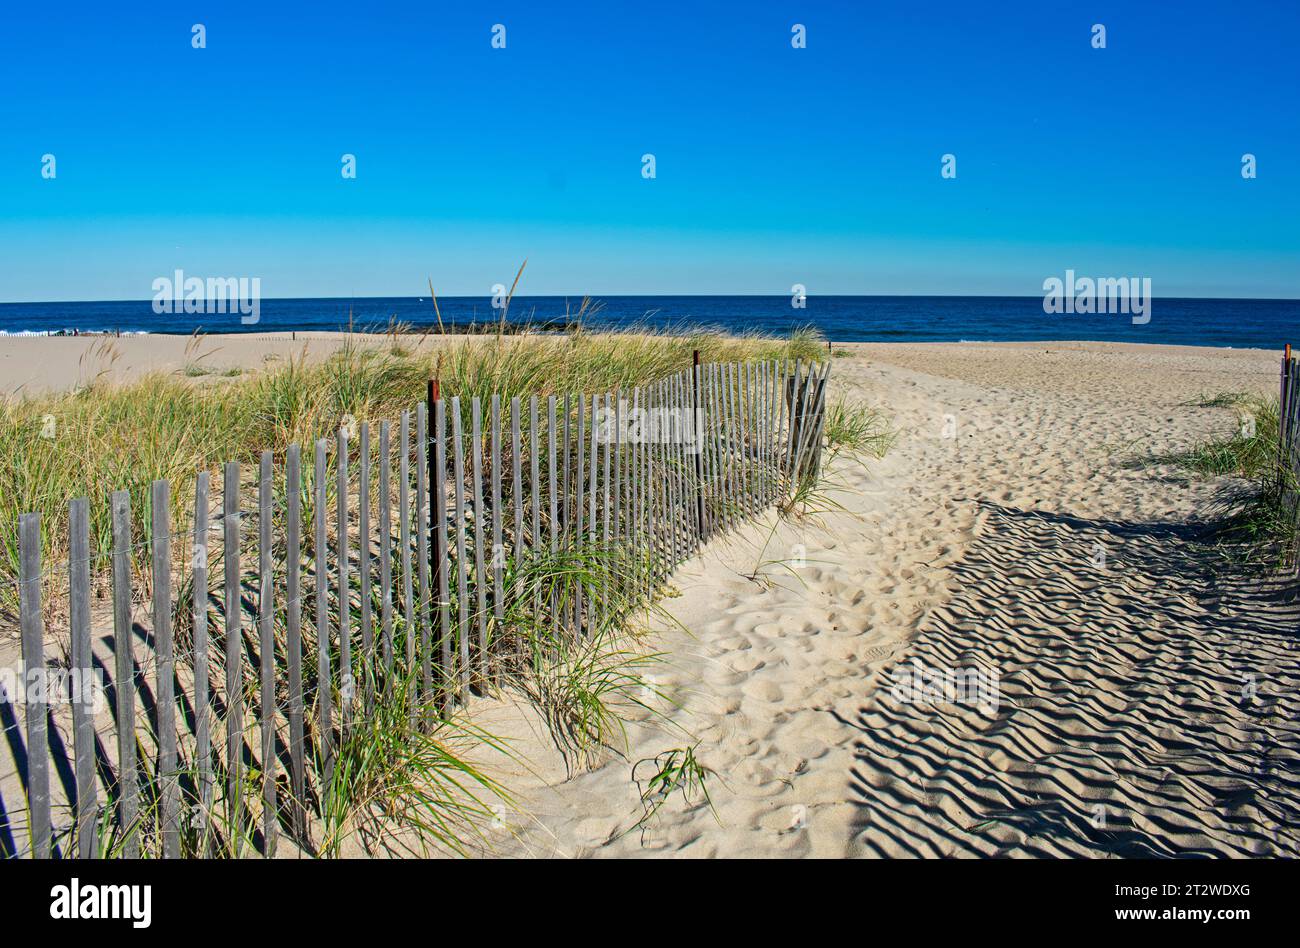 Late afternoon sun casts intriguing shadows of fence slats on beige beach sand on a clear day -01 Stock Photo